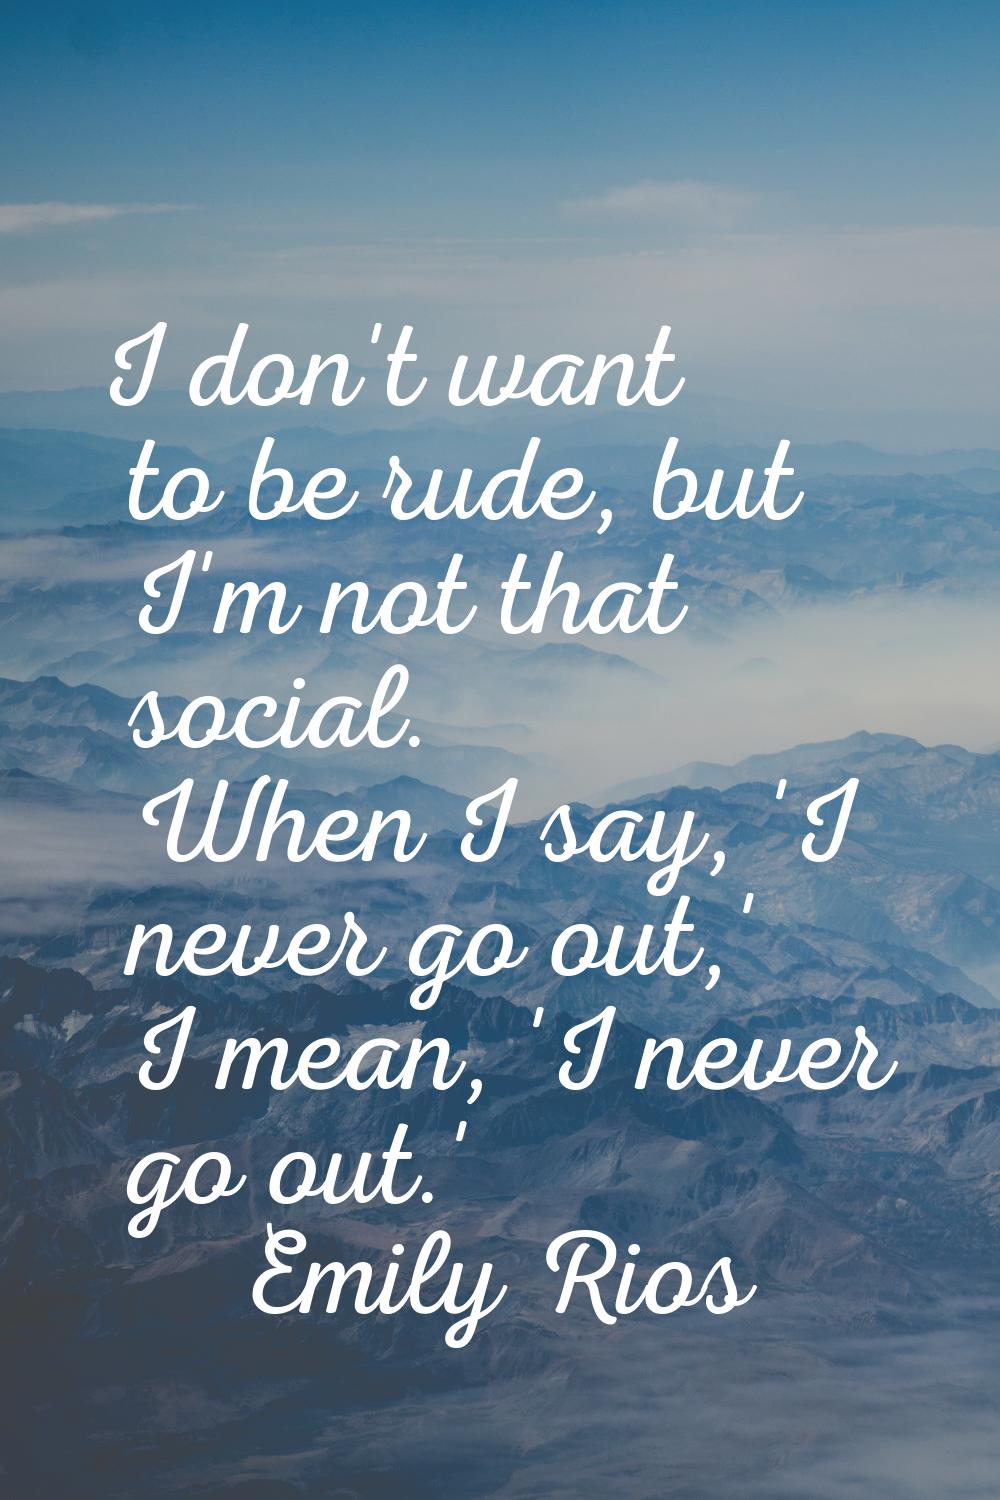 I don't want to be rude, but I'm not that social. When I say, 'I never go out,' I mean, 'I never go